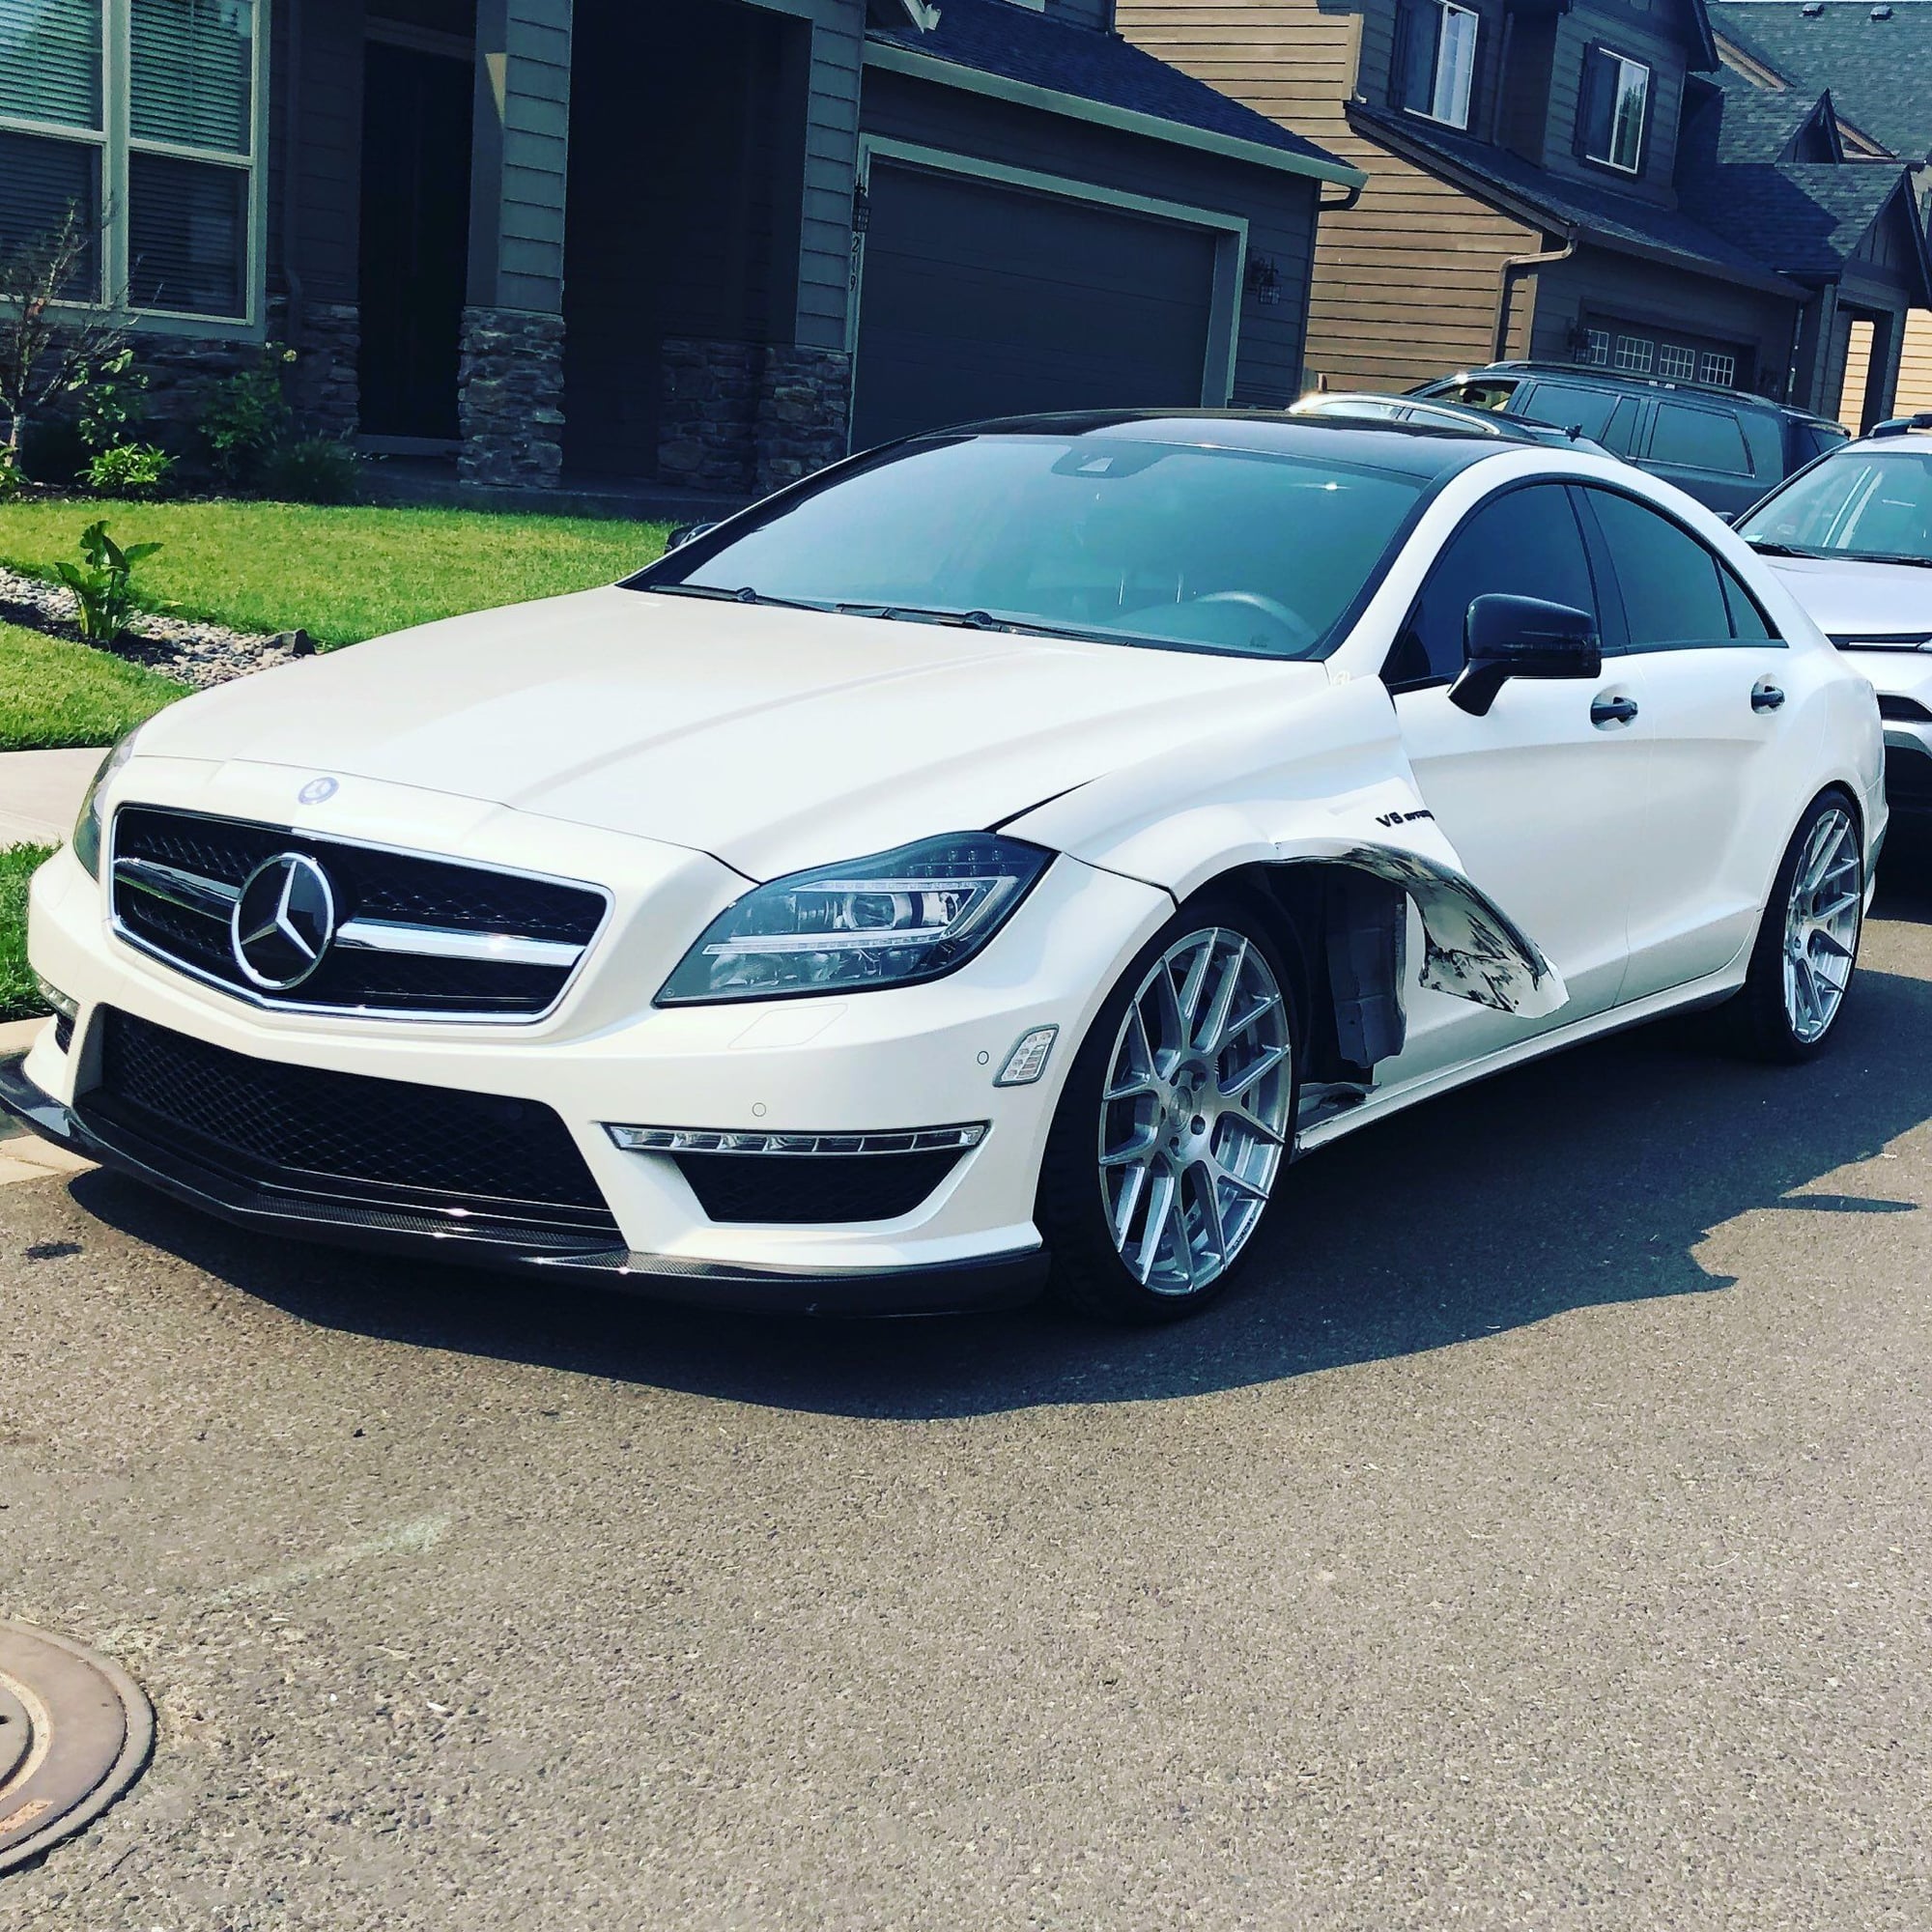 2012 Mercedes-Benz CLS63 AMG - 2012 mercedes cls63 damaged - Used - VIN wddlj7eb6ca040777 - 48,000 Miles - White - Vancouver, WA 98682, United States